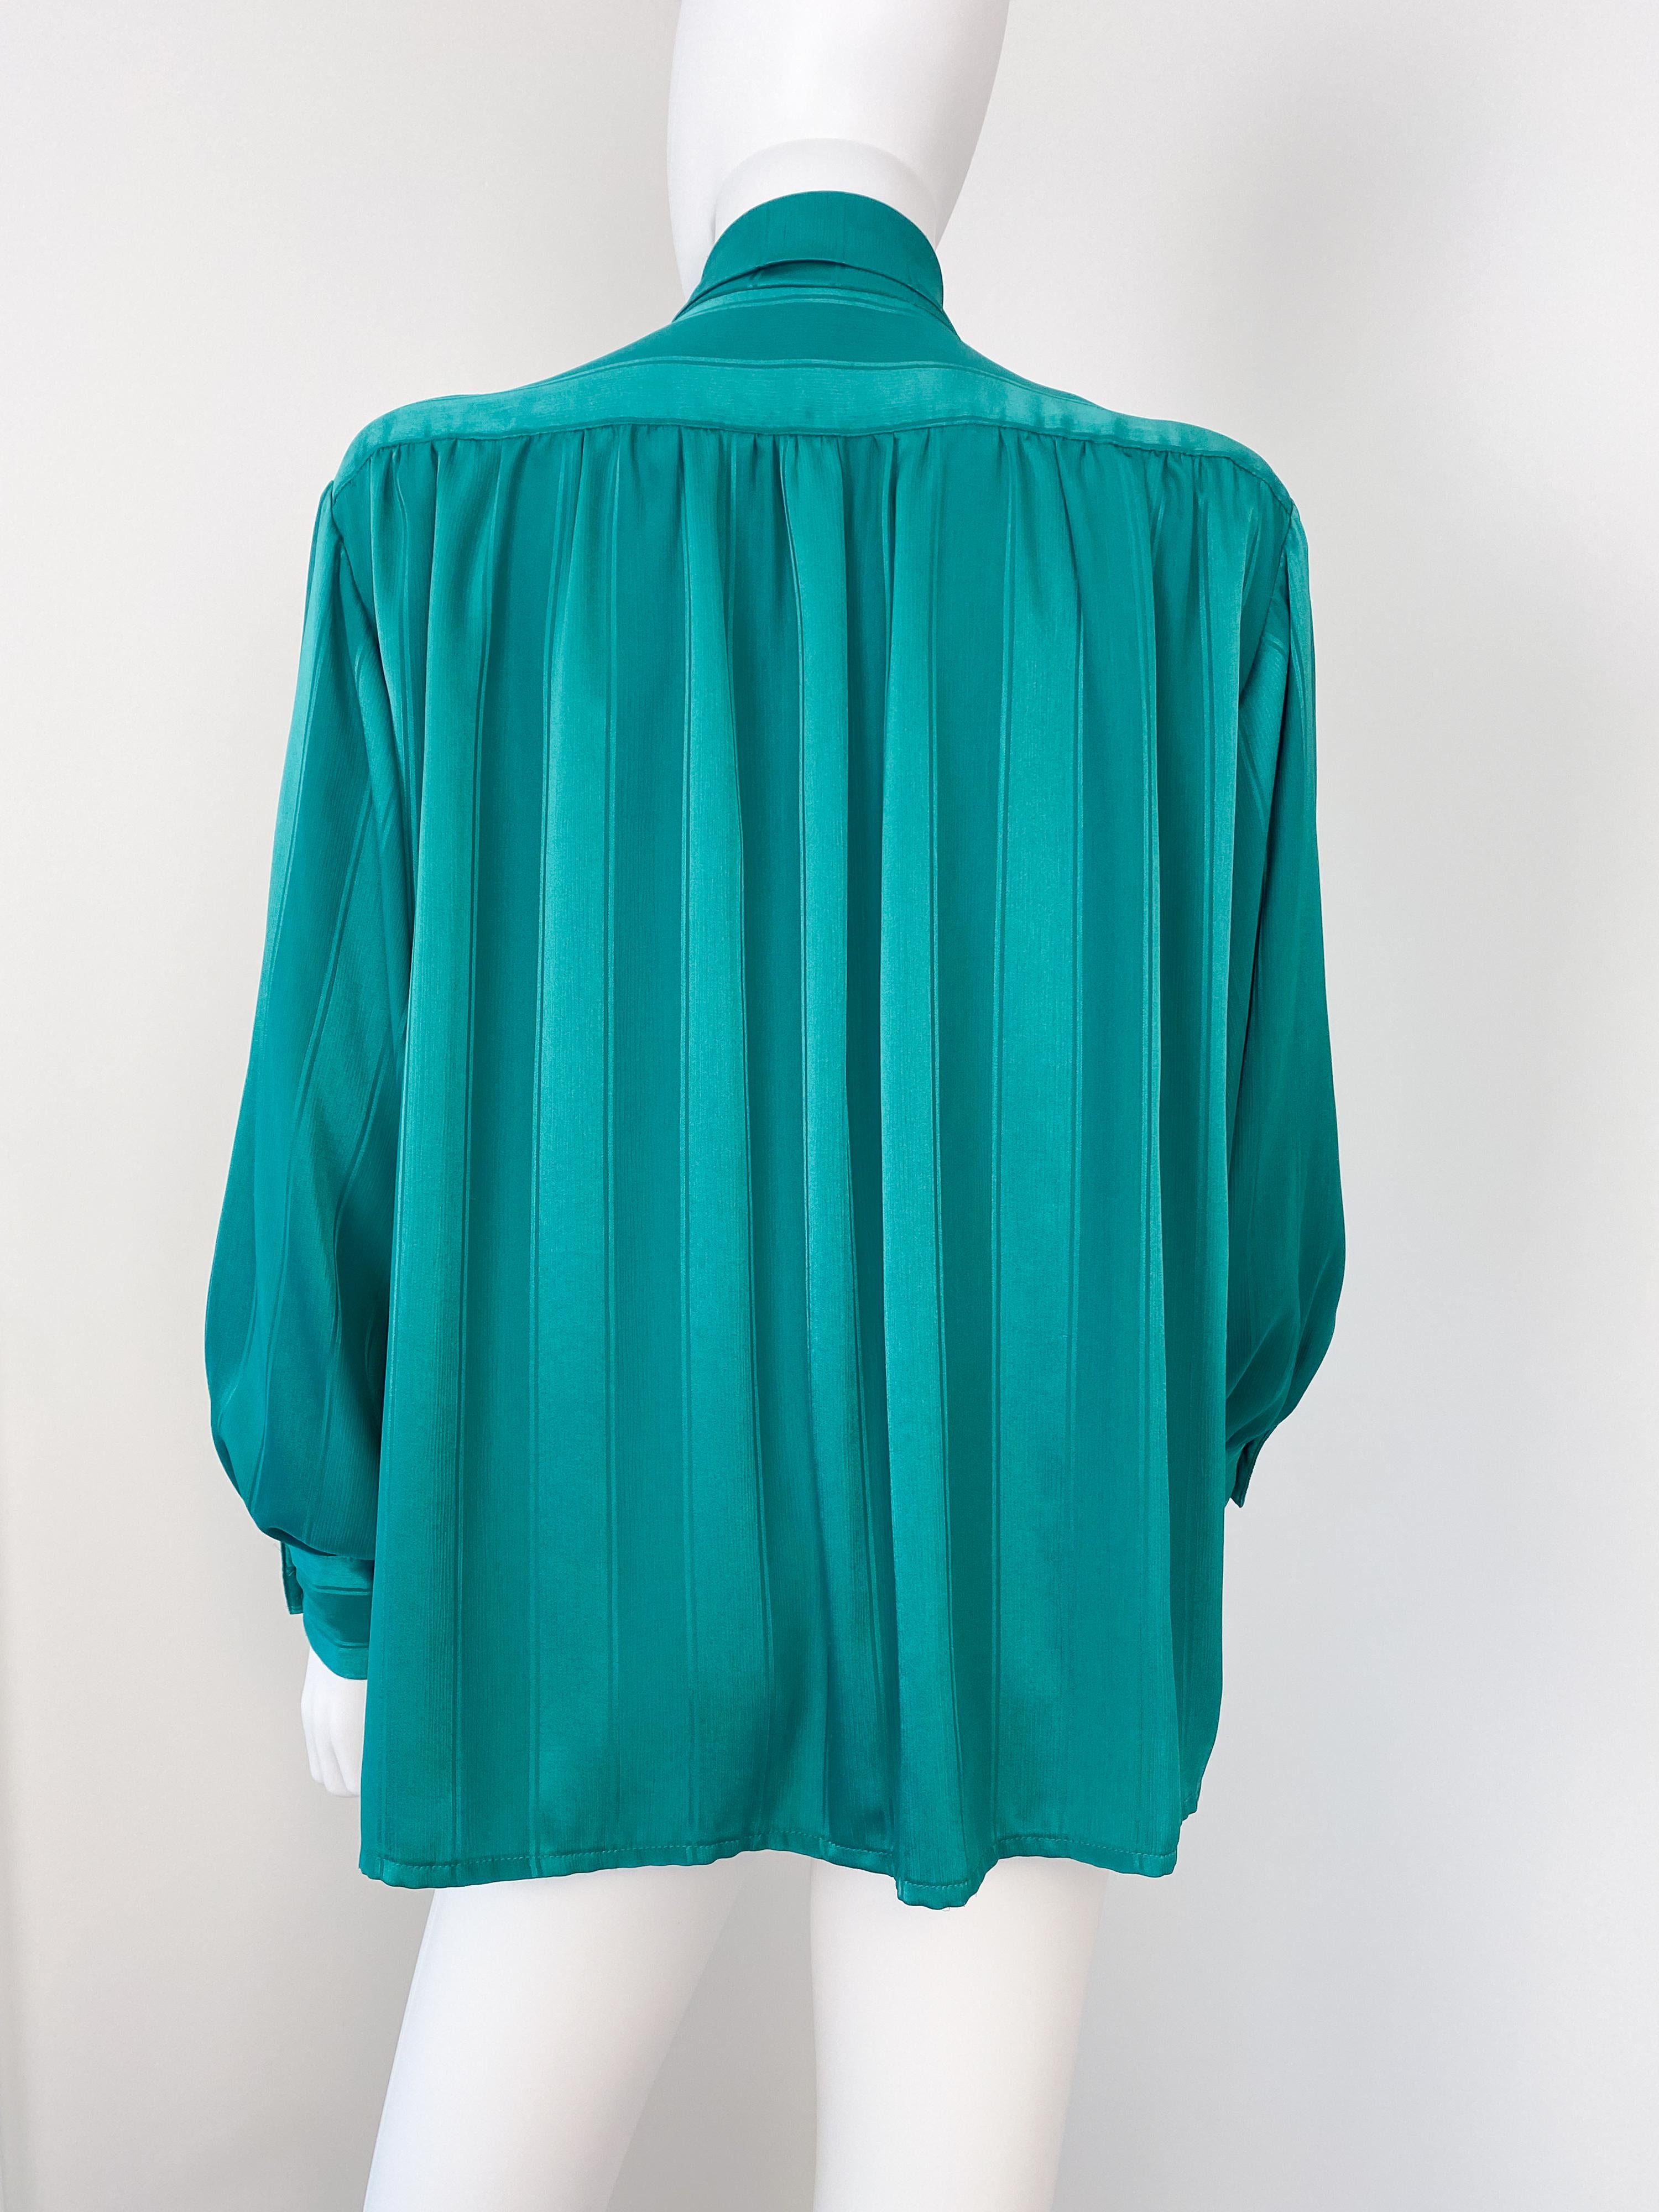 Vintage 1980s Silky Polyester Bow Blouse Top Emerald Green Stripes Size 12/14 For Sale 5